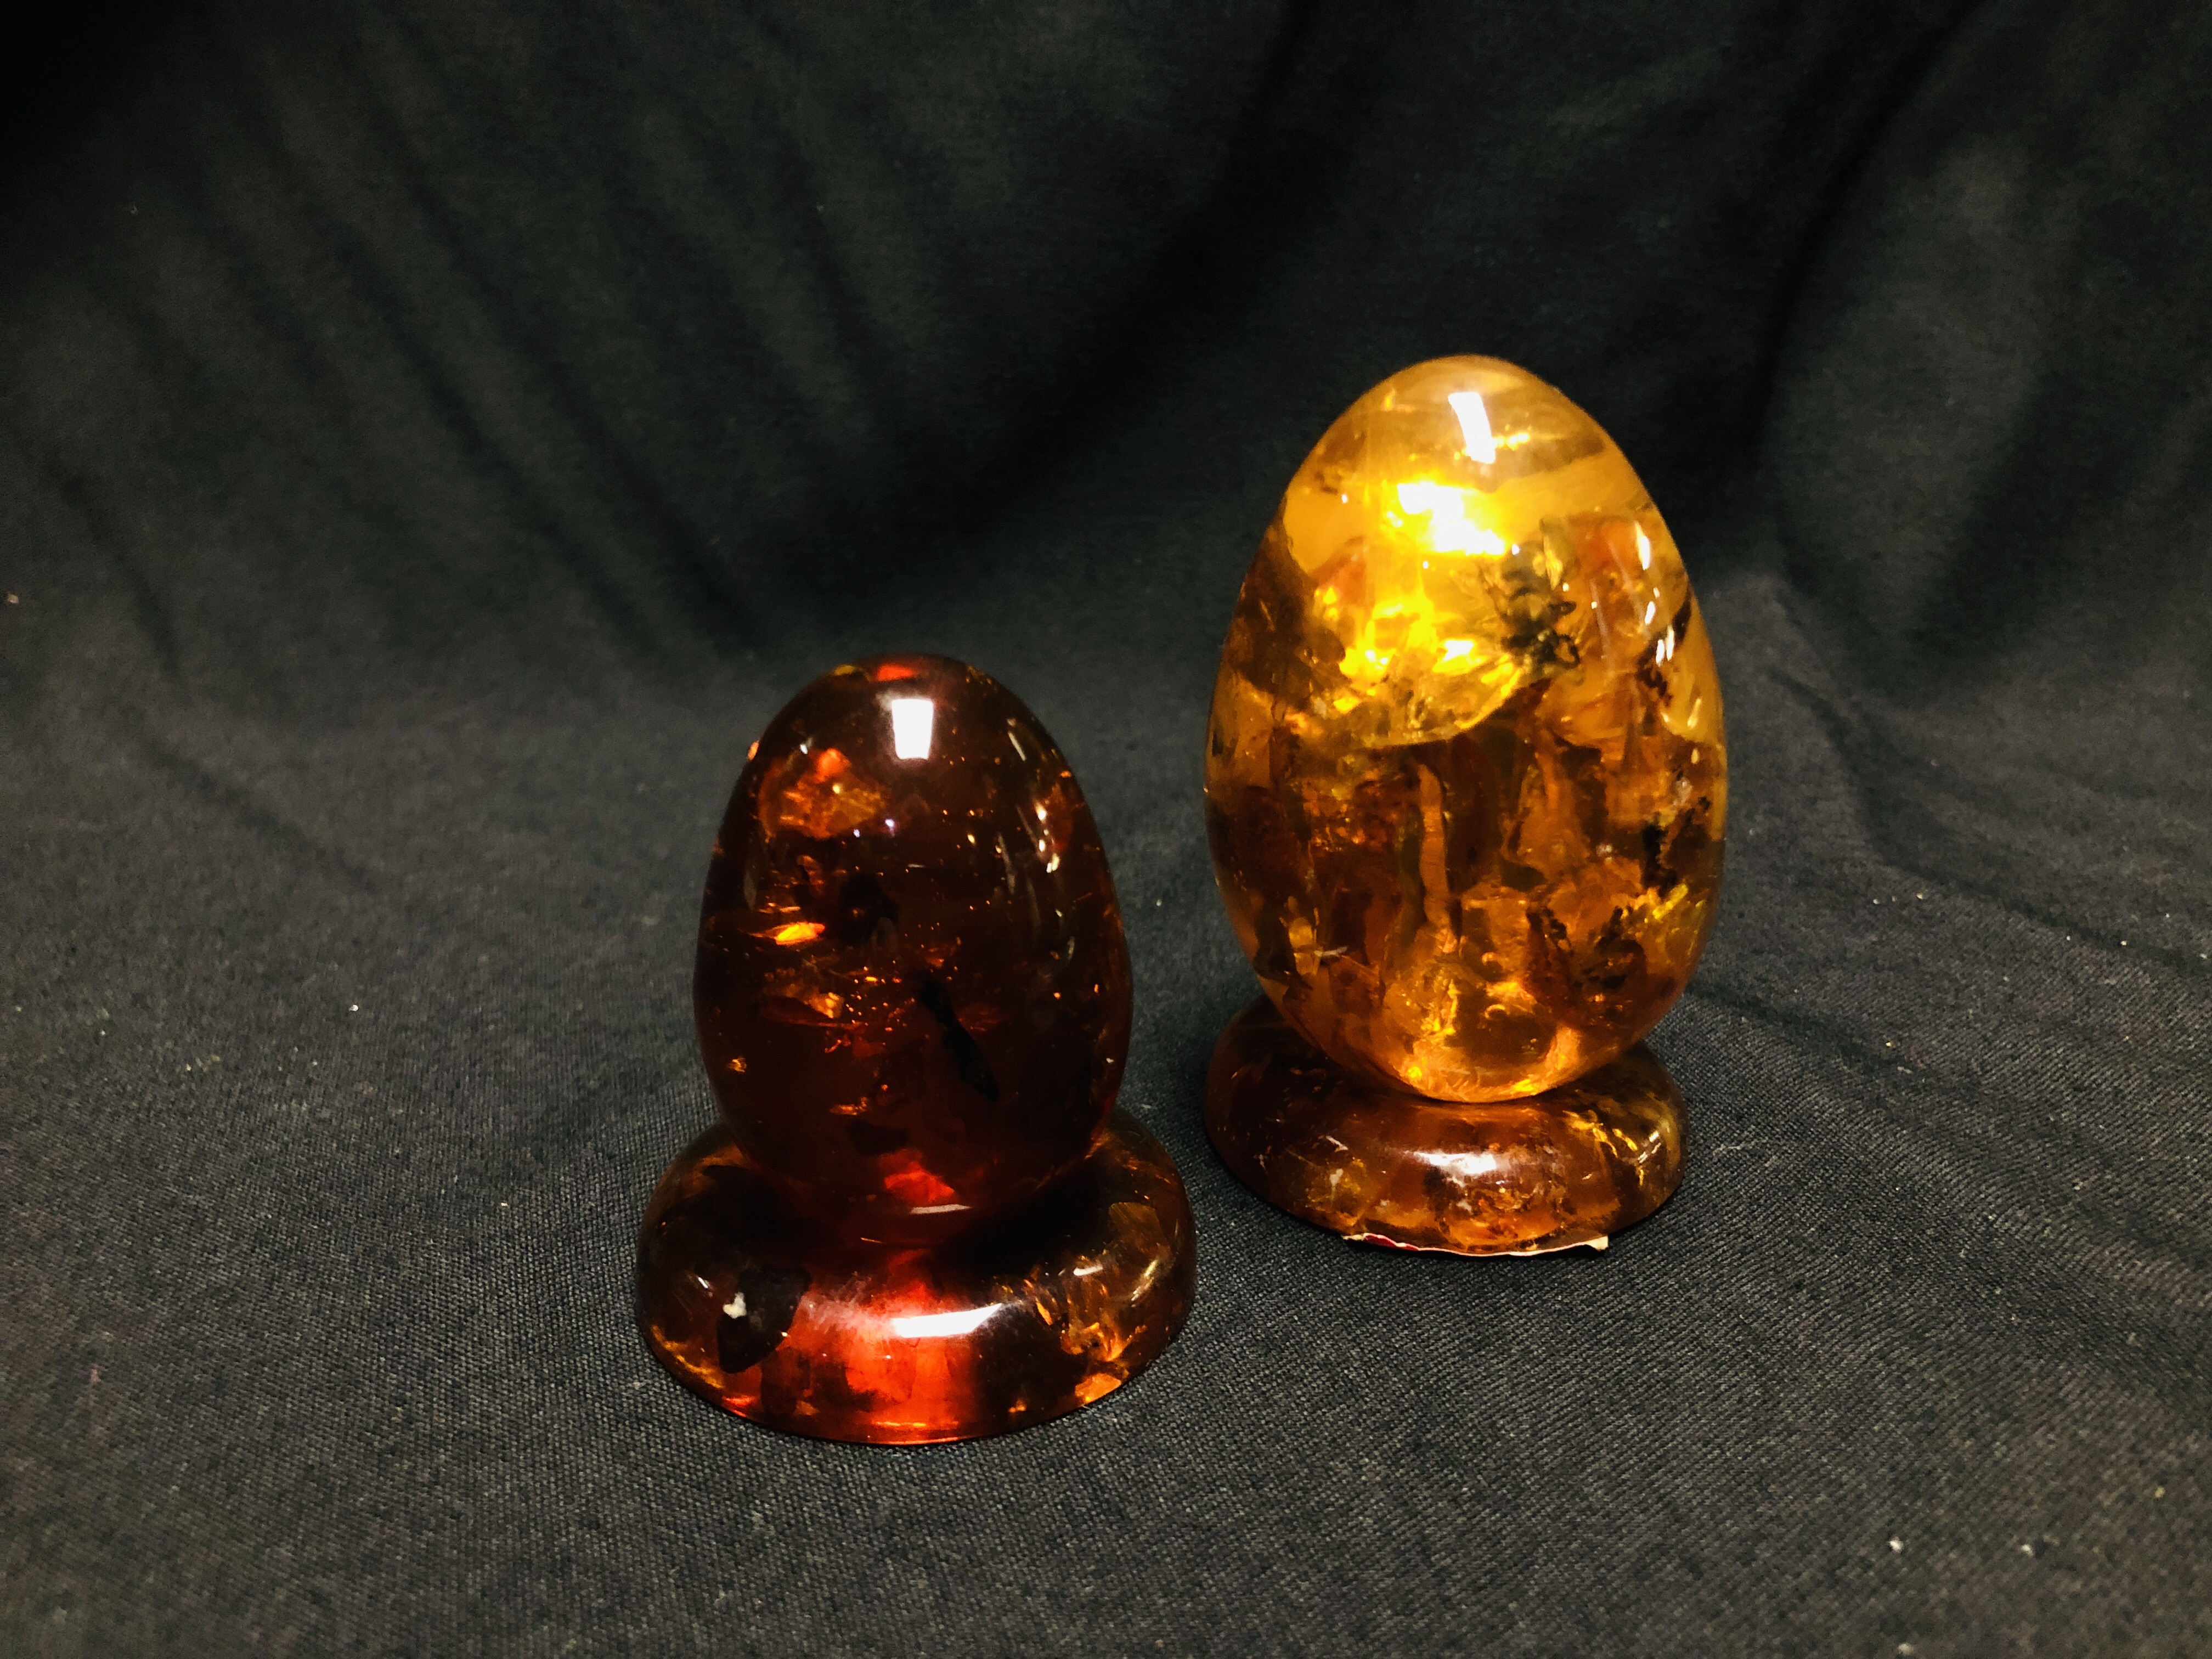 TWO POLISHED EGGS, ONE HAVING INSET INSECT ALONG WITH TWO POLISHED AMBER DISCS, DIAMETER 4.5CM.